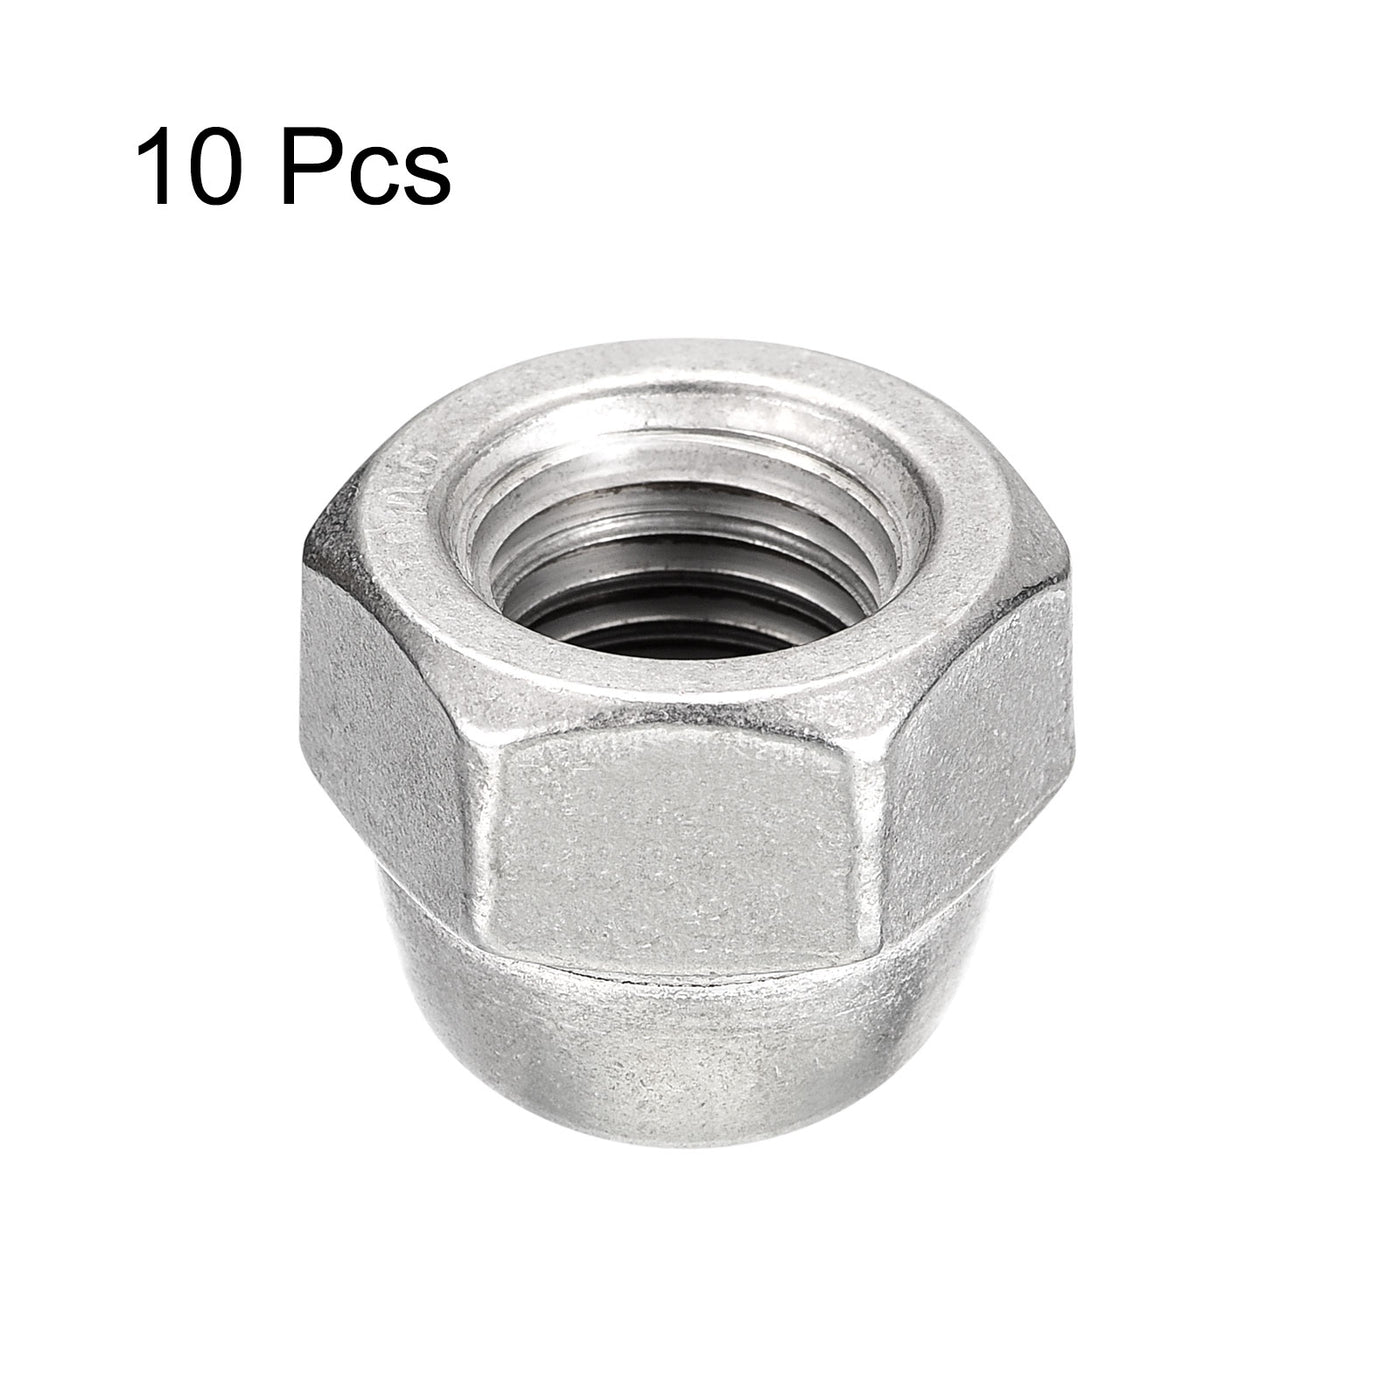 uxcell Uxcell 5/8-11 Acorn Cap Nuts,10pcs - 304 Stainless Steel Hardware Nuts, Acorn Hex Cap Dome Head Nuts for Fasteners (Silver)